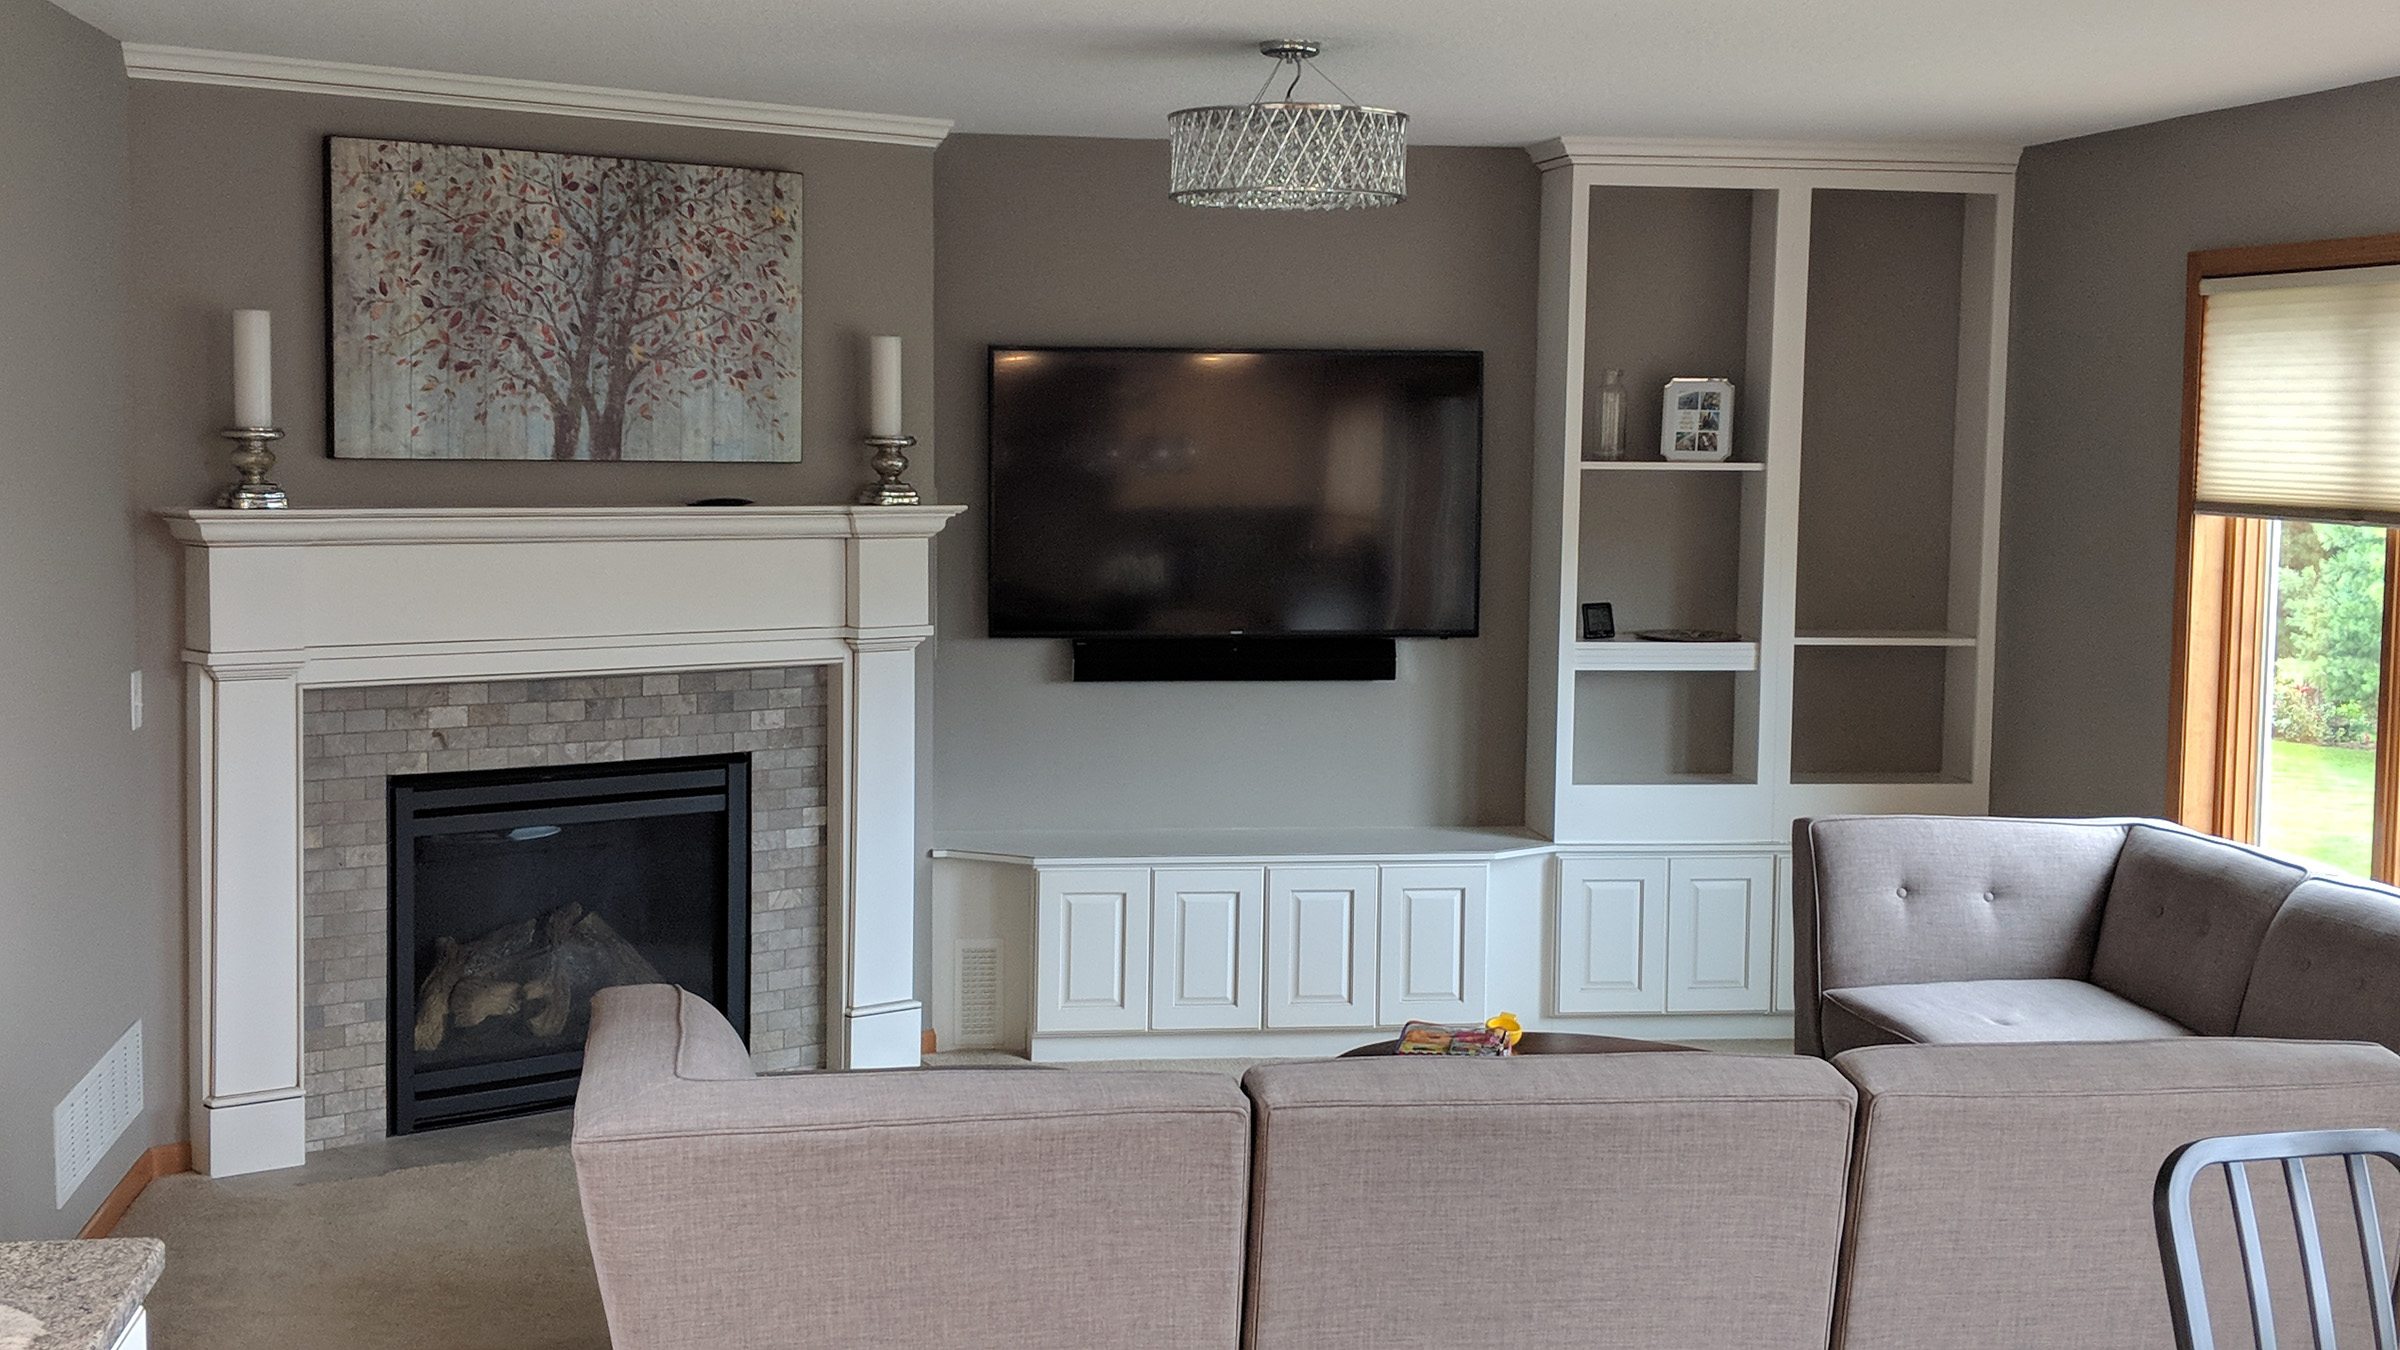 Media wall with built-ins and wall mounted TV